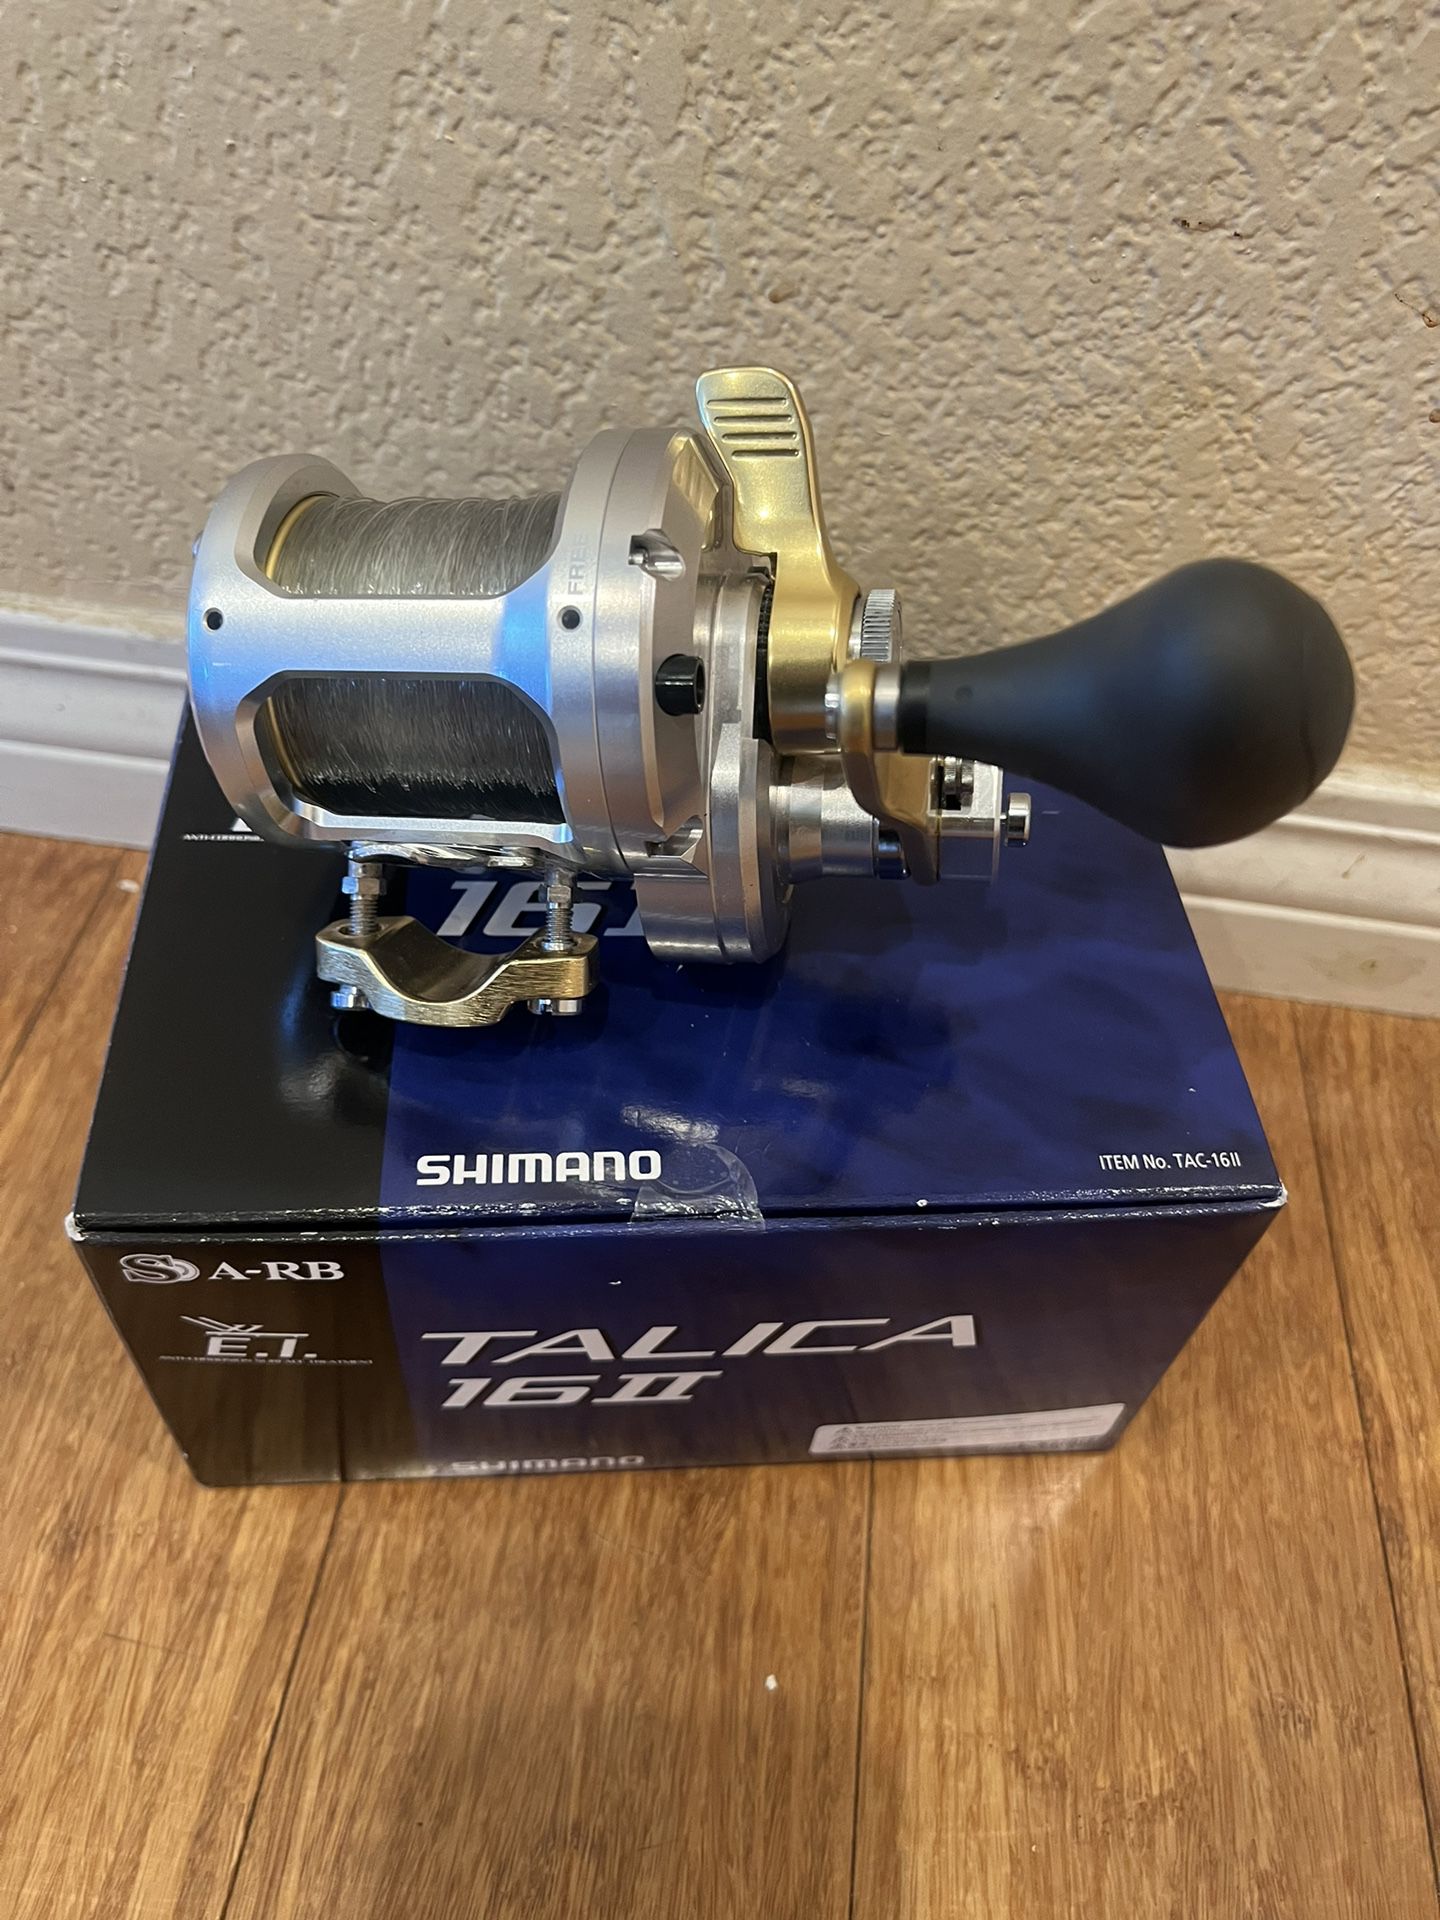 Shimano Talica 16 2 Speed for Sale in San Diego, CA - OfferUp